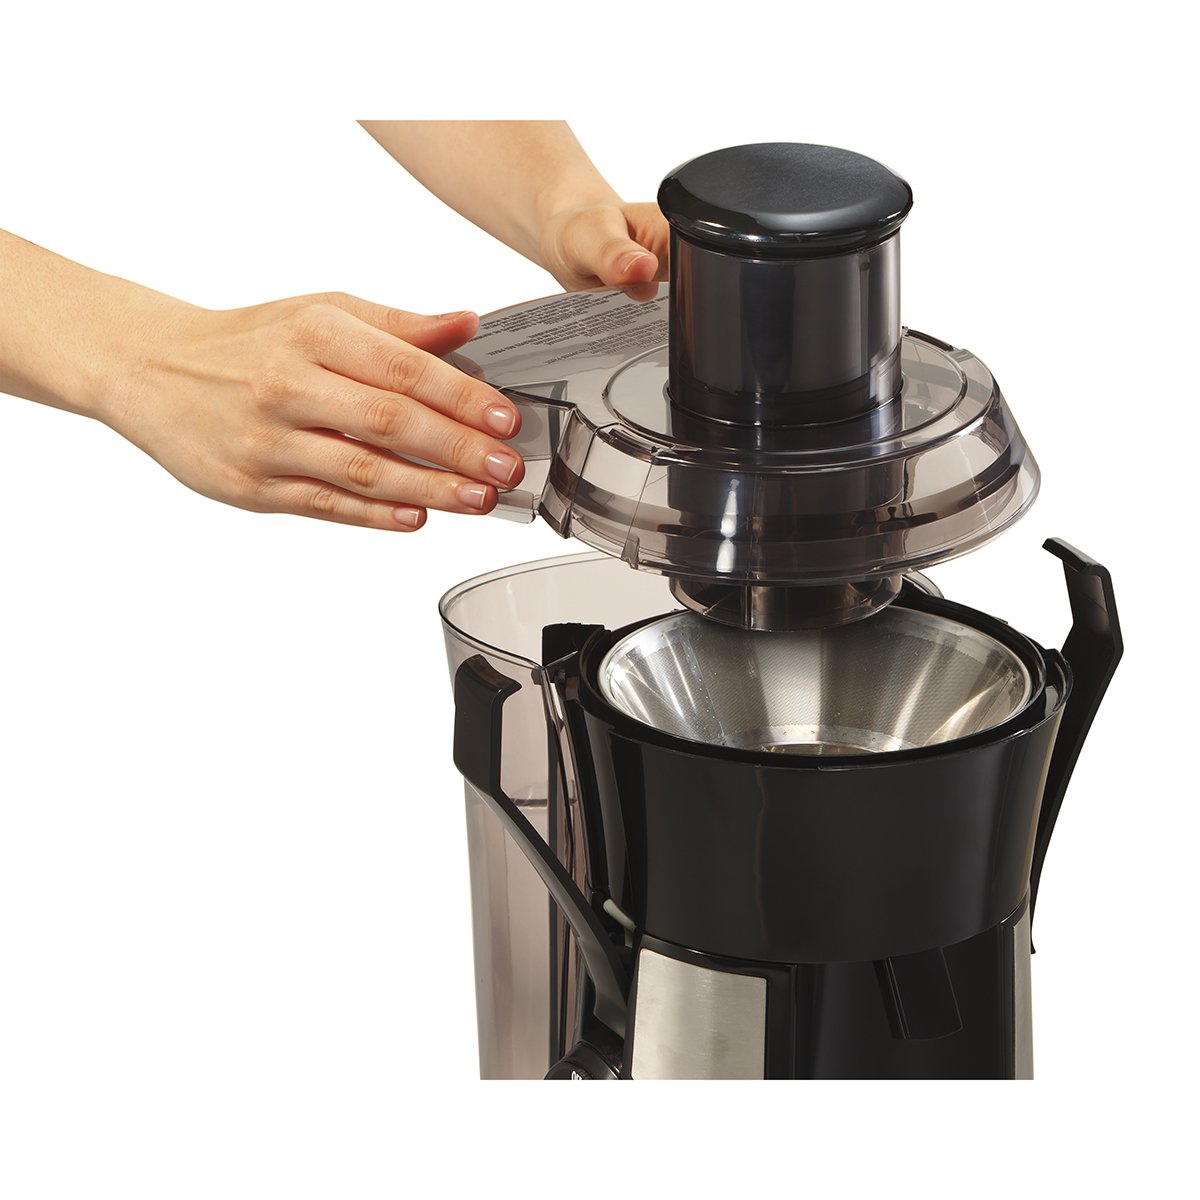 HAMILTON BEACH Stainless Steel 800W Big Mouth PRO Juicer